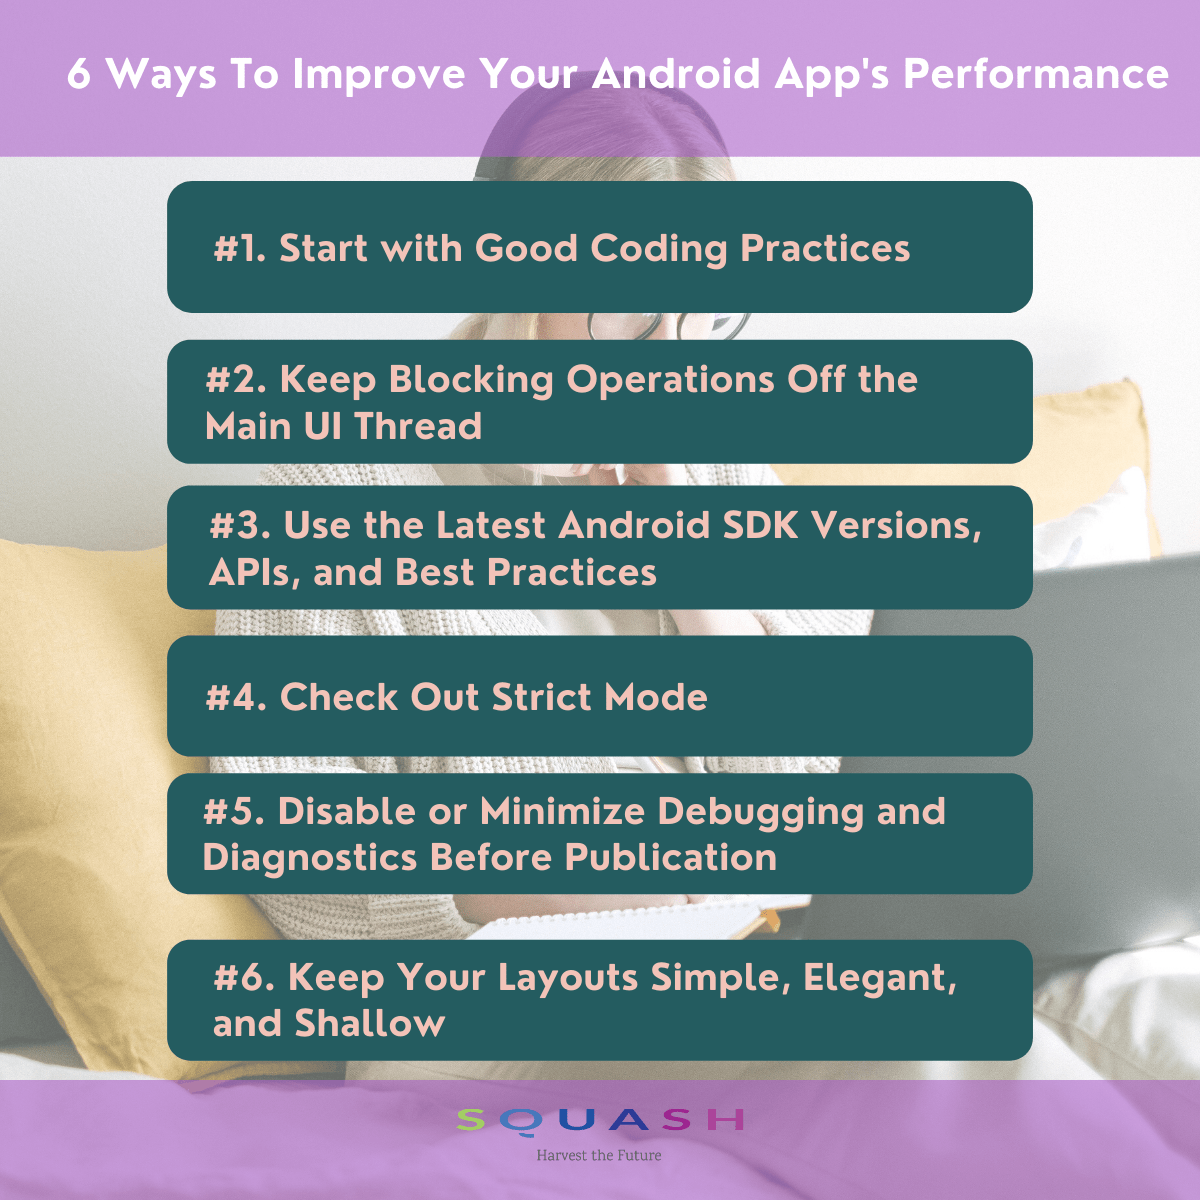 Infographic-6-Ways-To-Improve-Your-Android-App's-Performance-In-2021